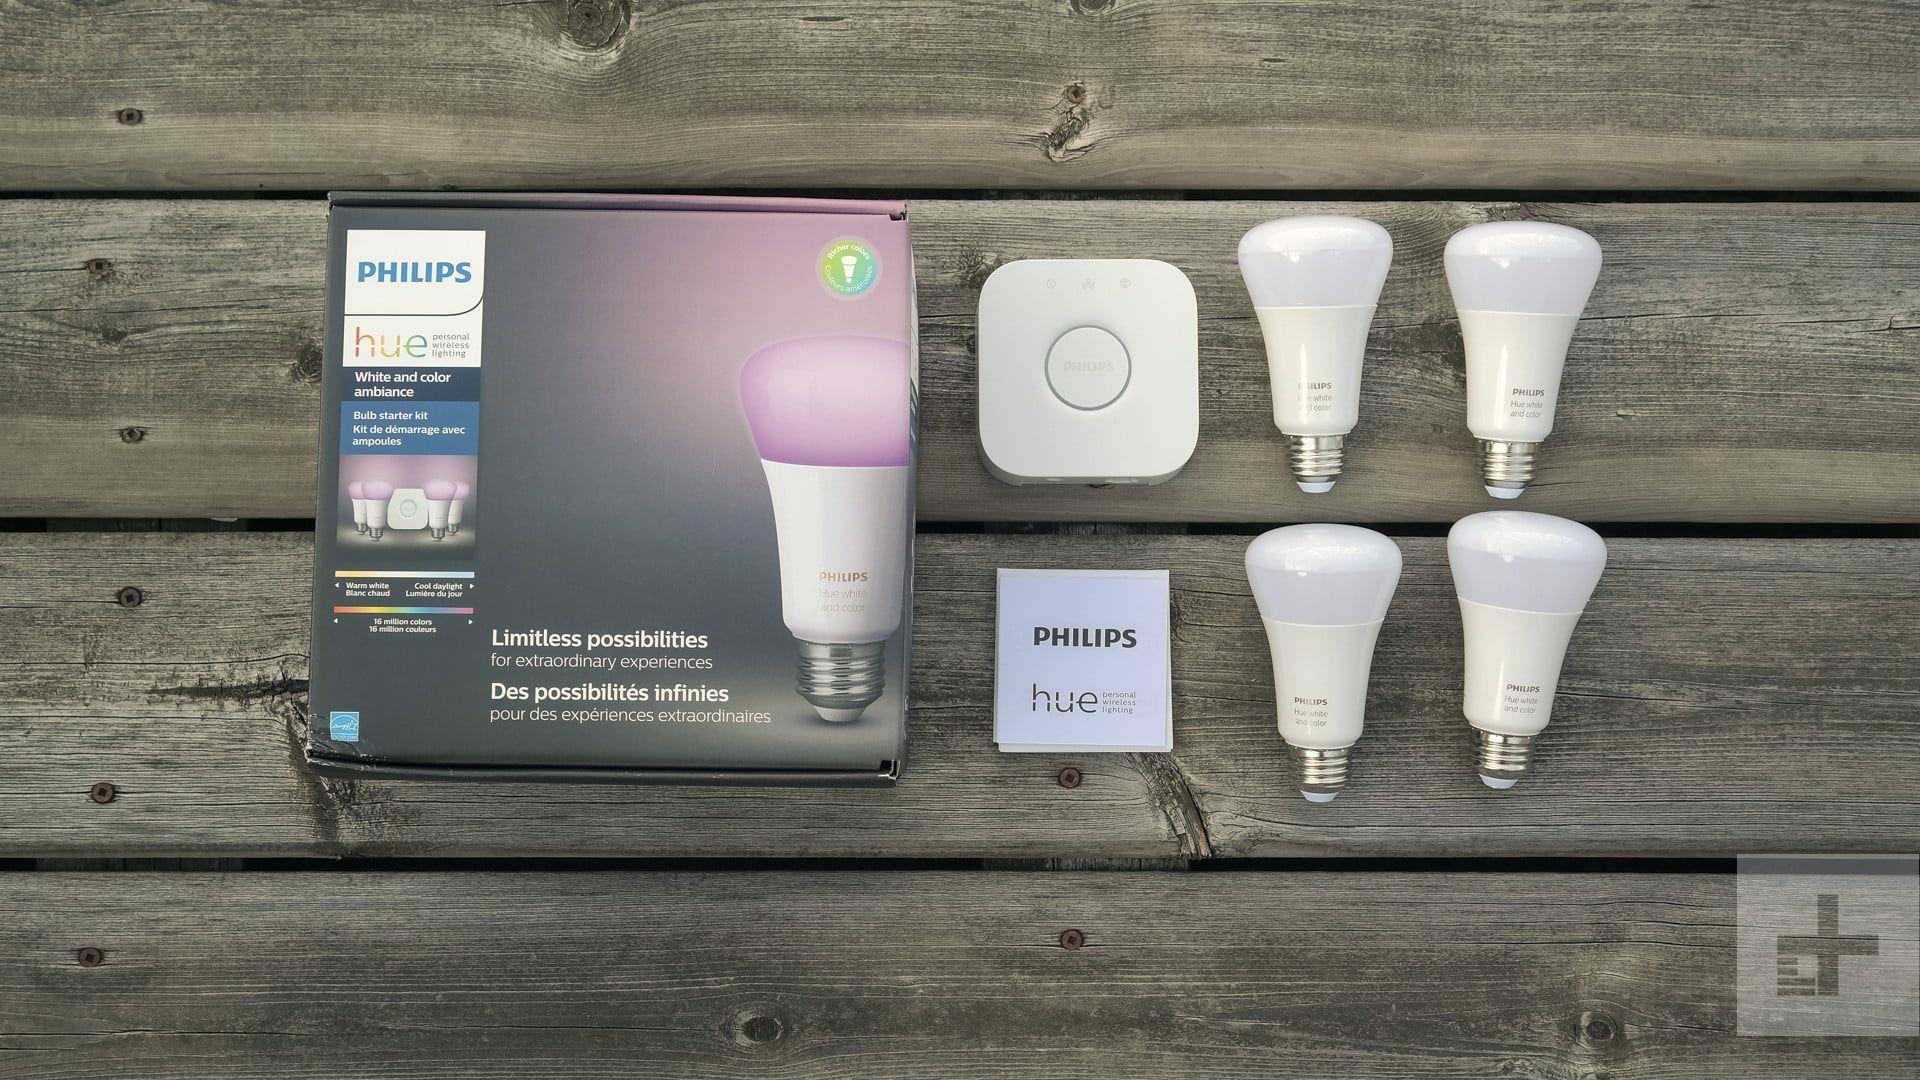 Cool Amazon Logo - Amazon Isn't Alone: Philips Hue Has Been Experiencing Holiday